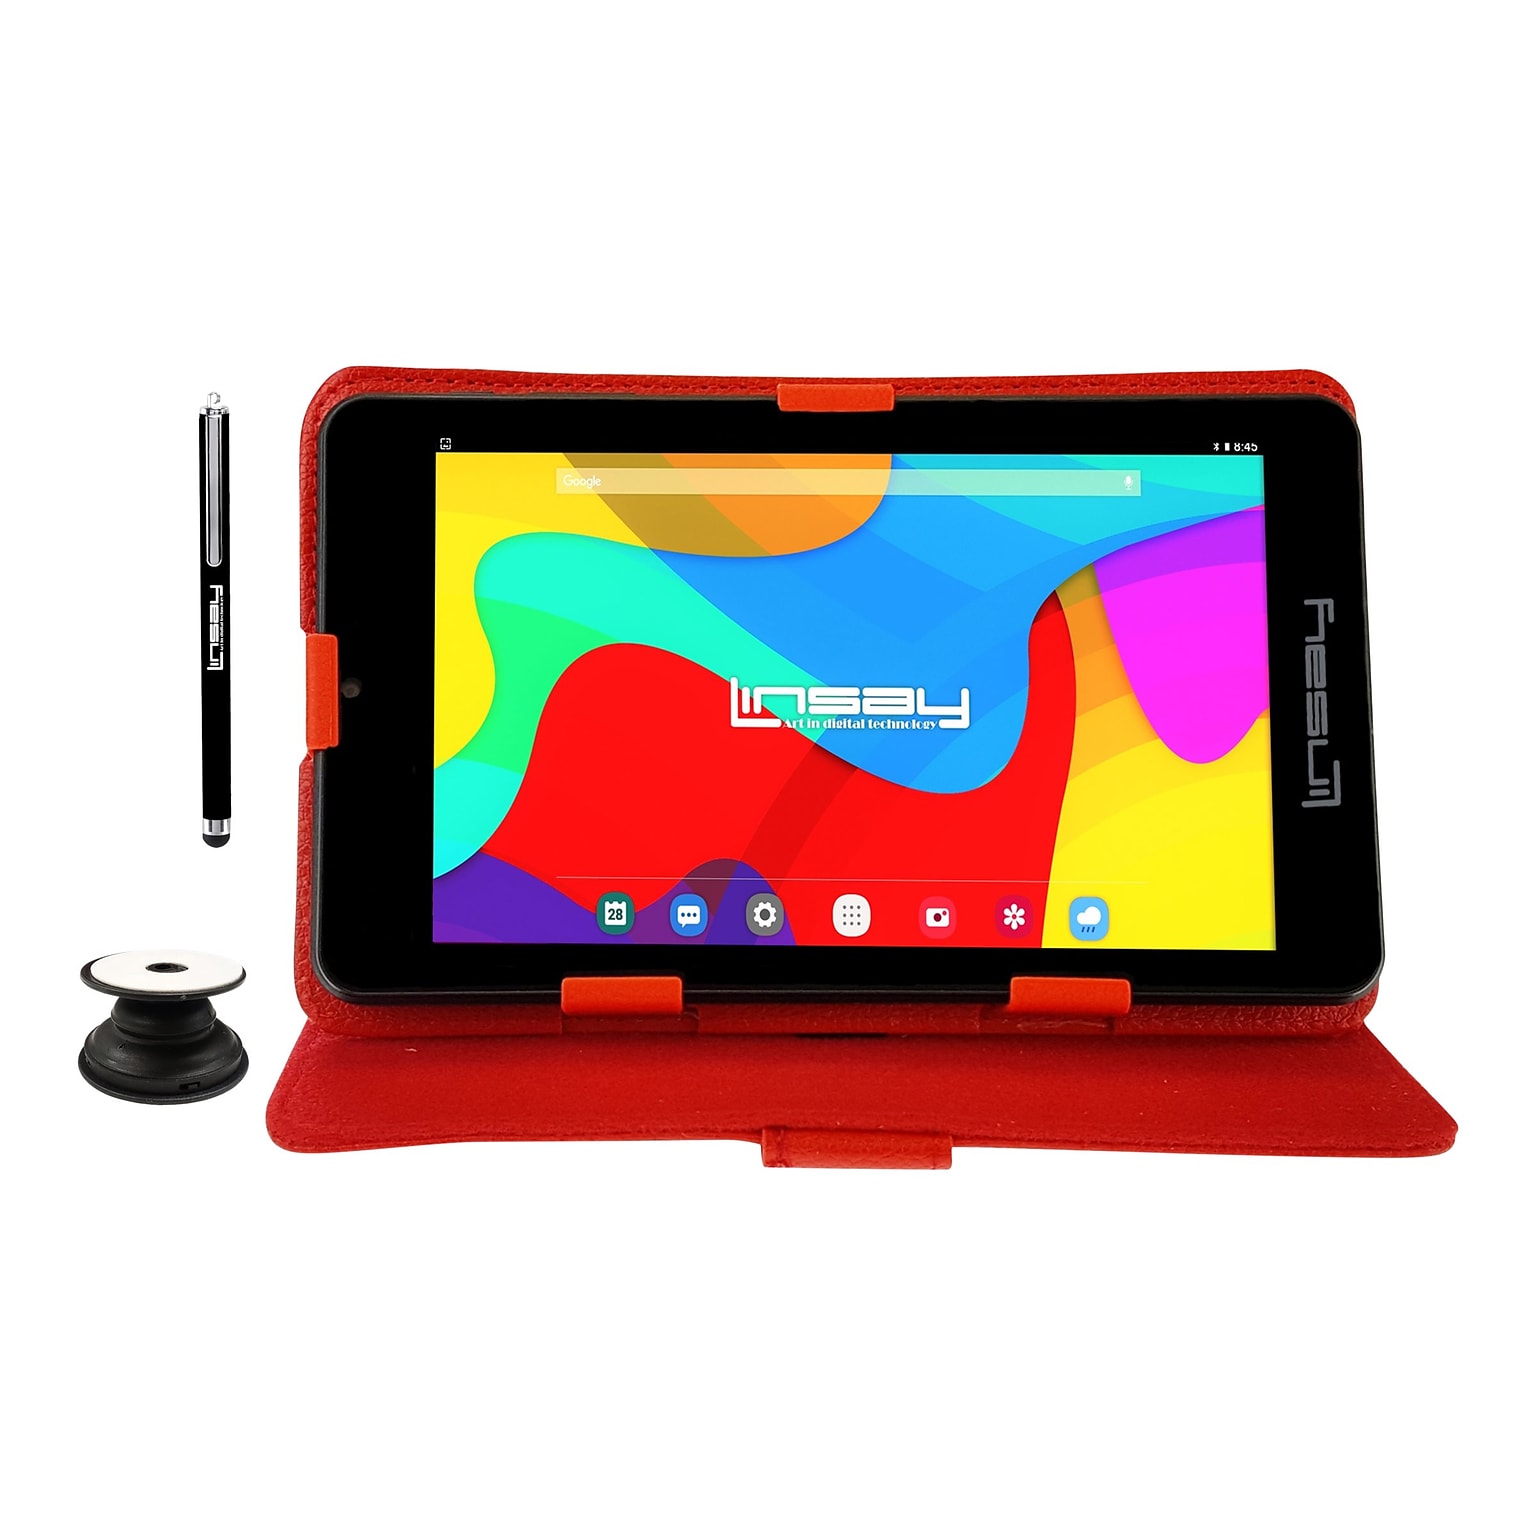 Linsay 7 Tablet, WiFi, 2GB RAM, 64GB Storage, Android 13, Black/Red (F7UHDCRP)